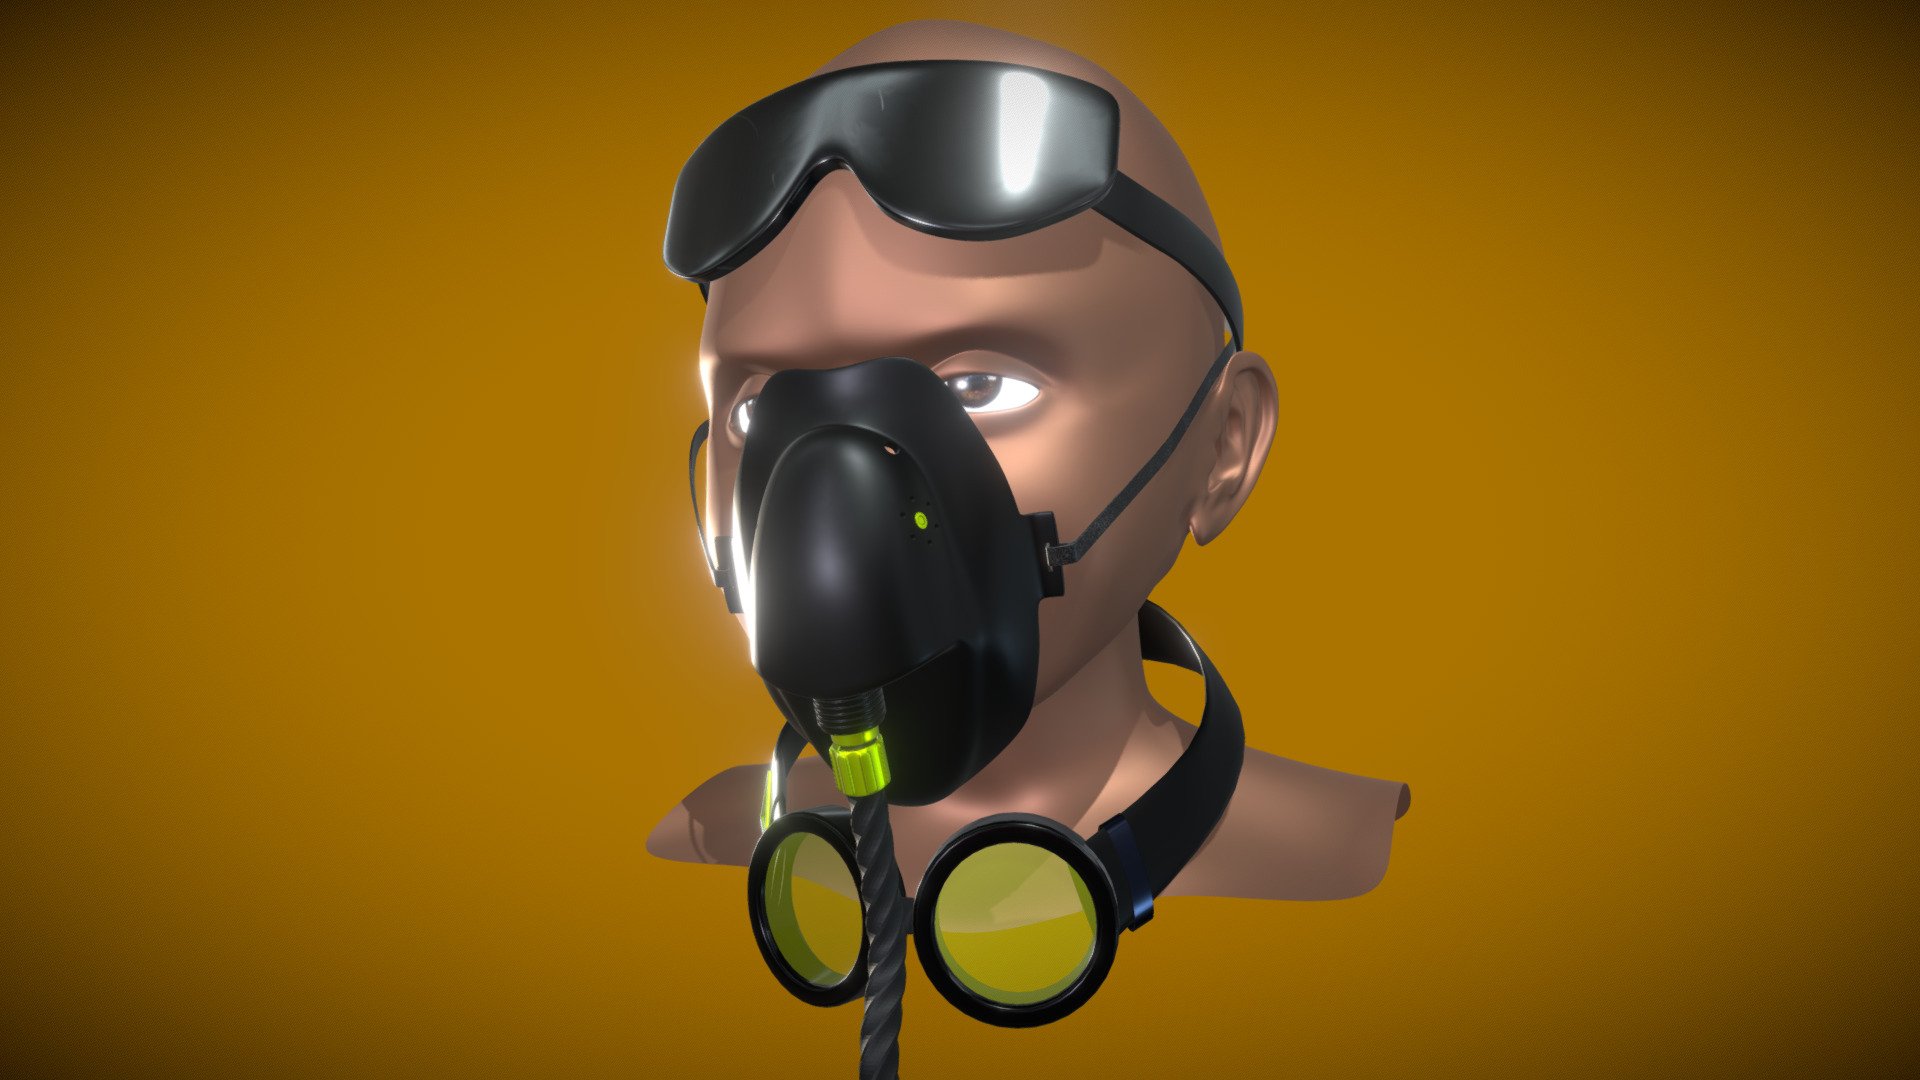 Oxygen Mask with Sci-Fi elements.
Made with C4D, available as .fbx 3d model